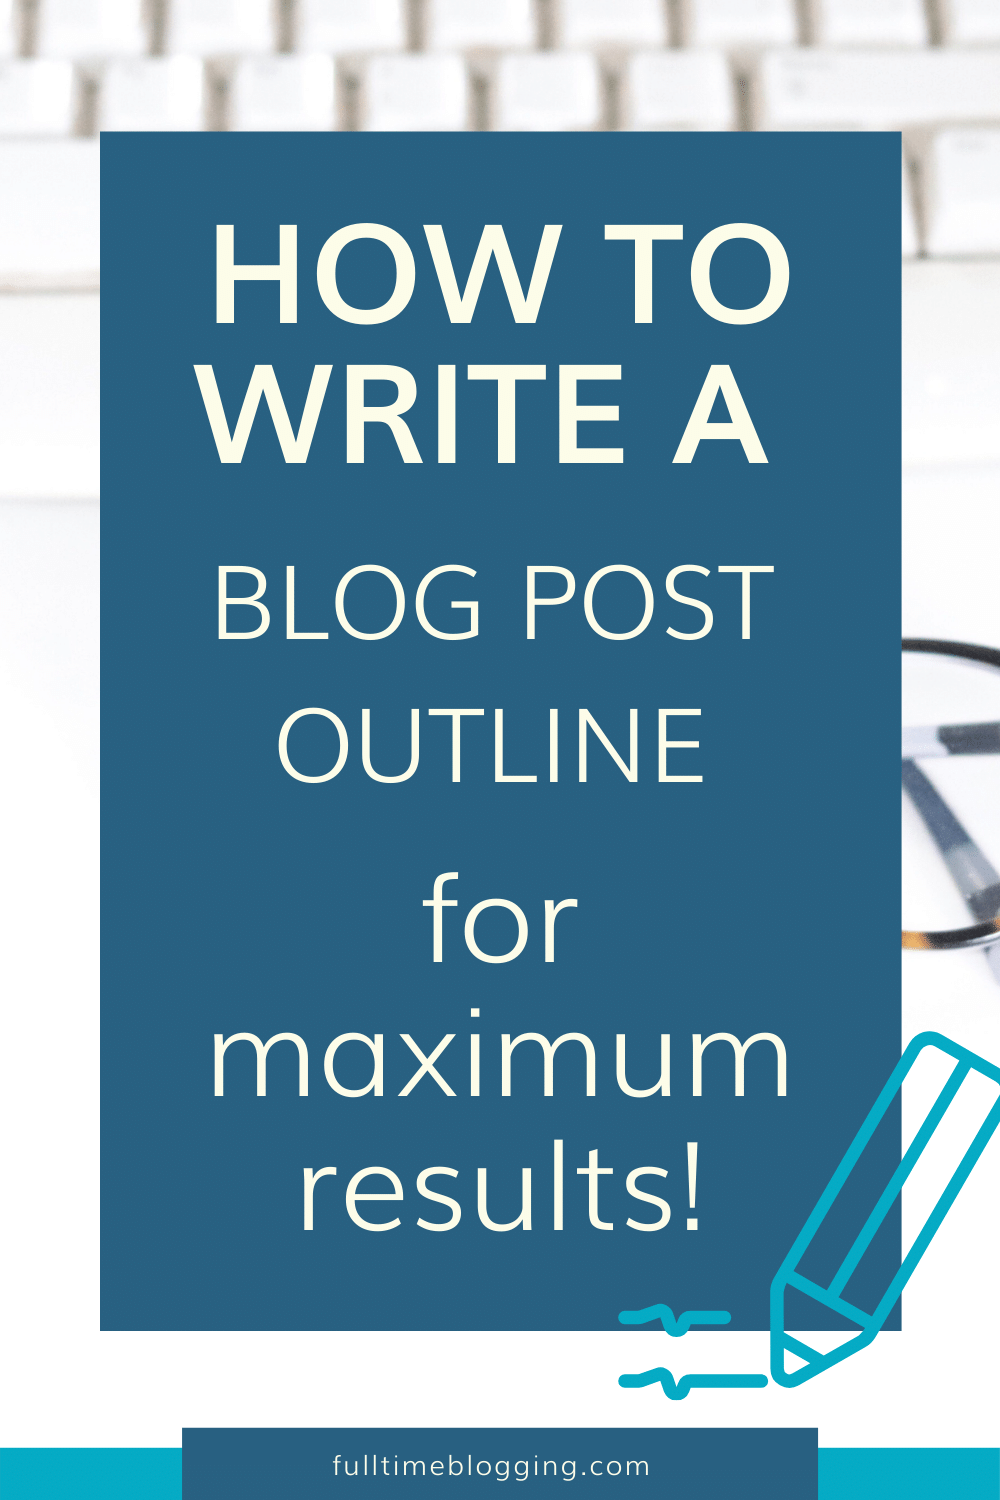 How To Write A Blog Post Outline And Get Maximum Results